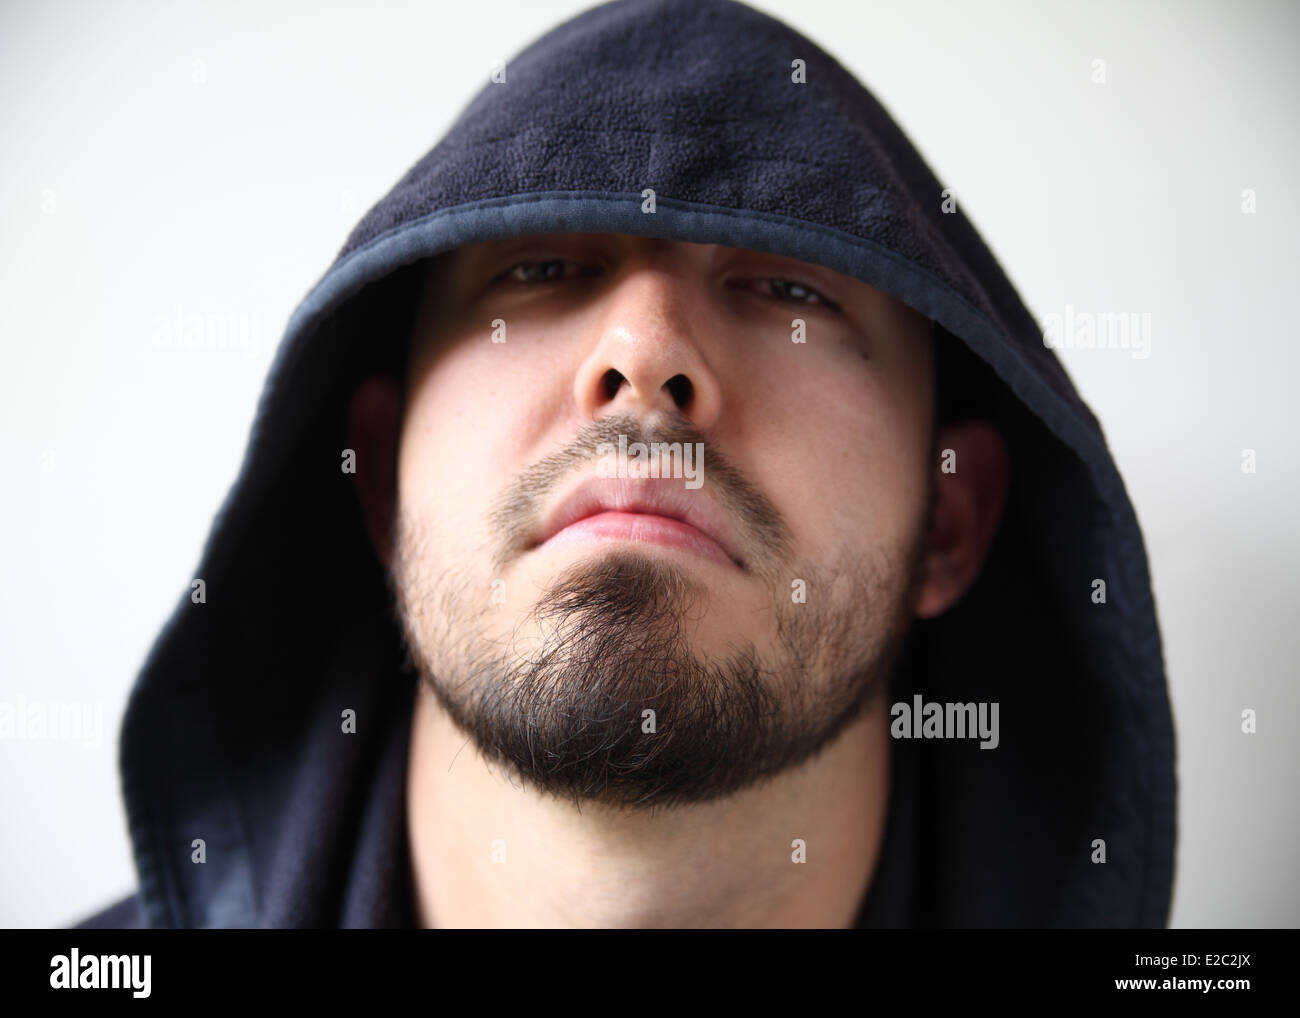 young man with dark hood hiding part of his face Stock Photo